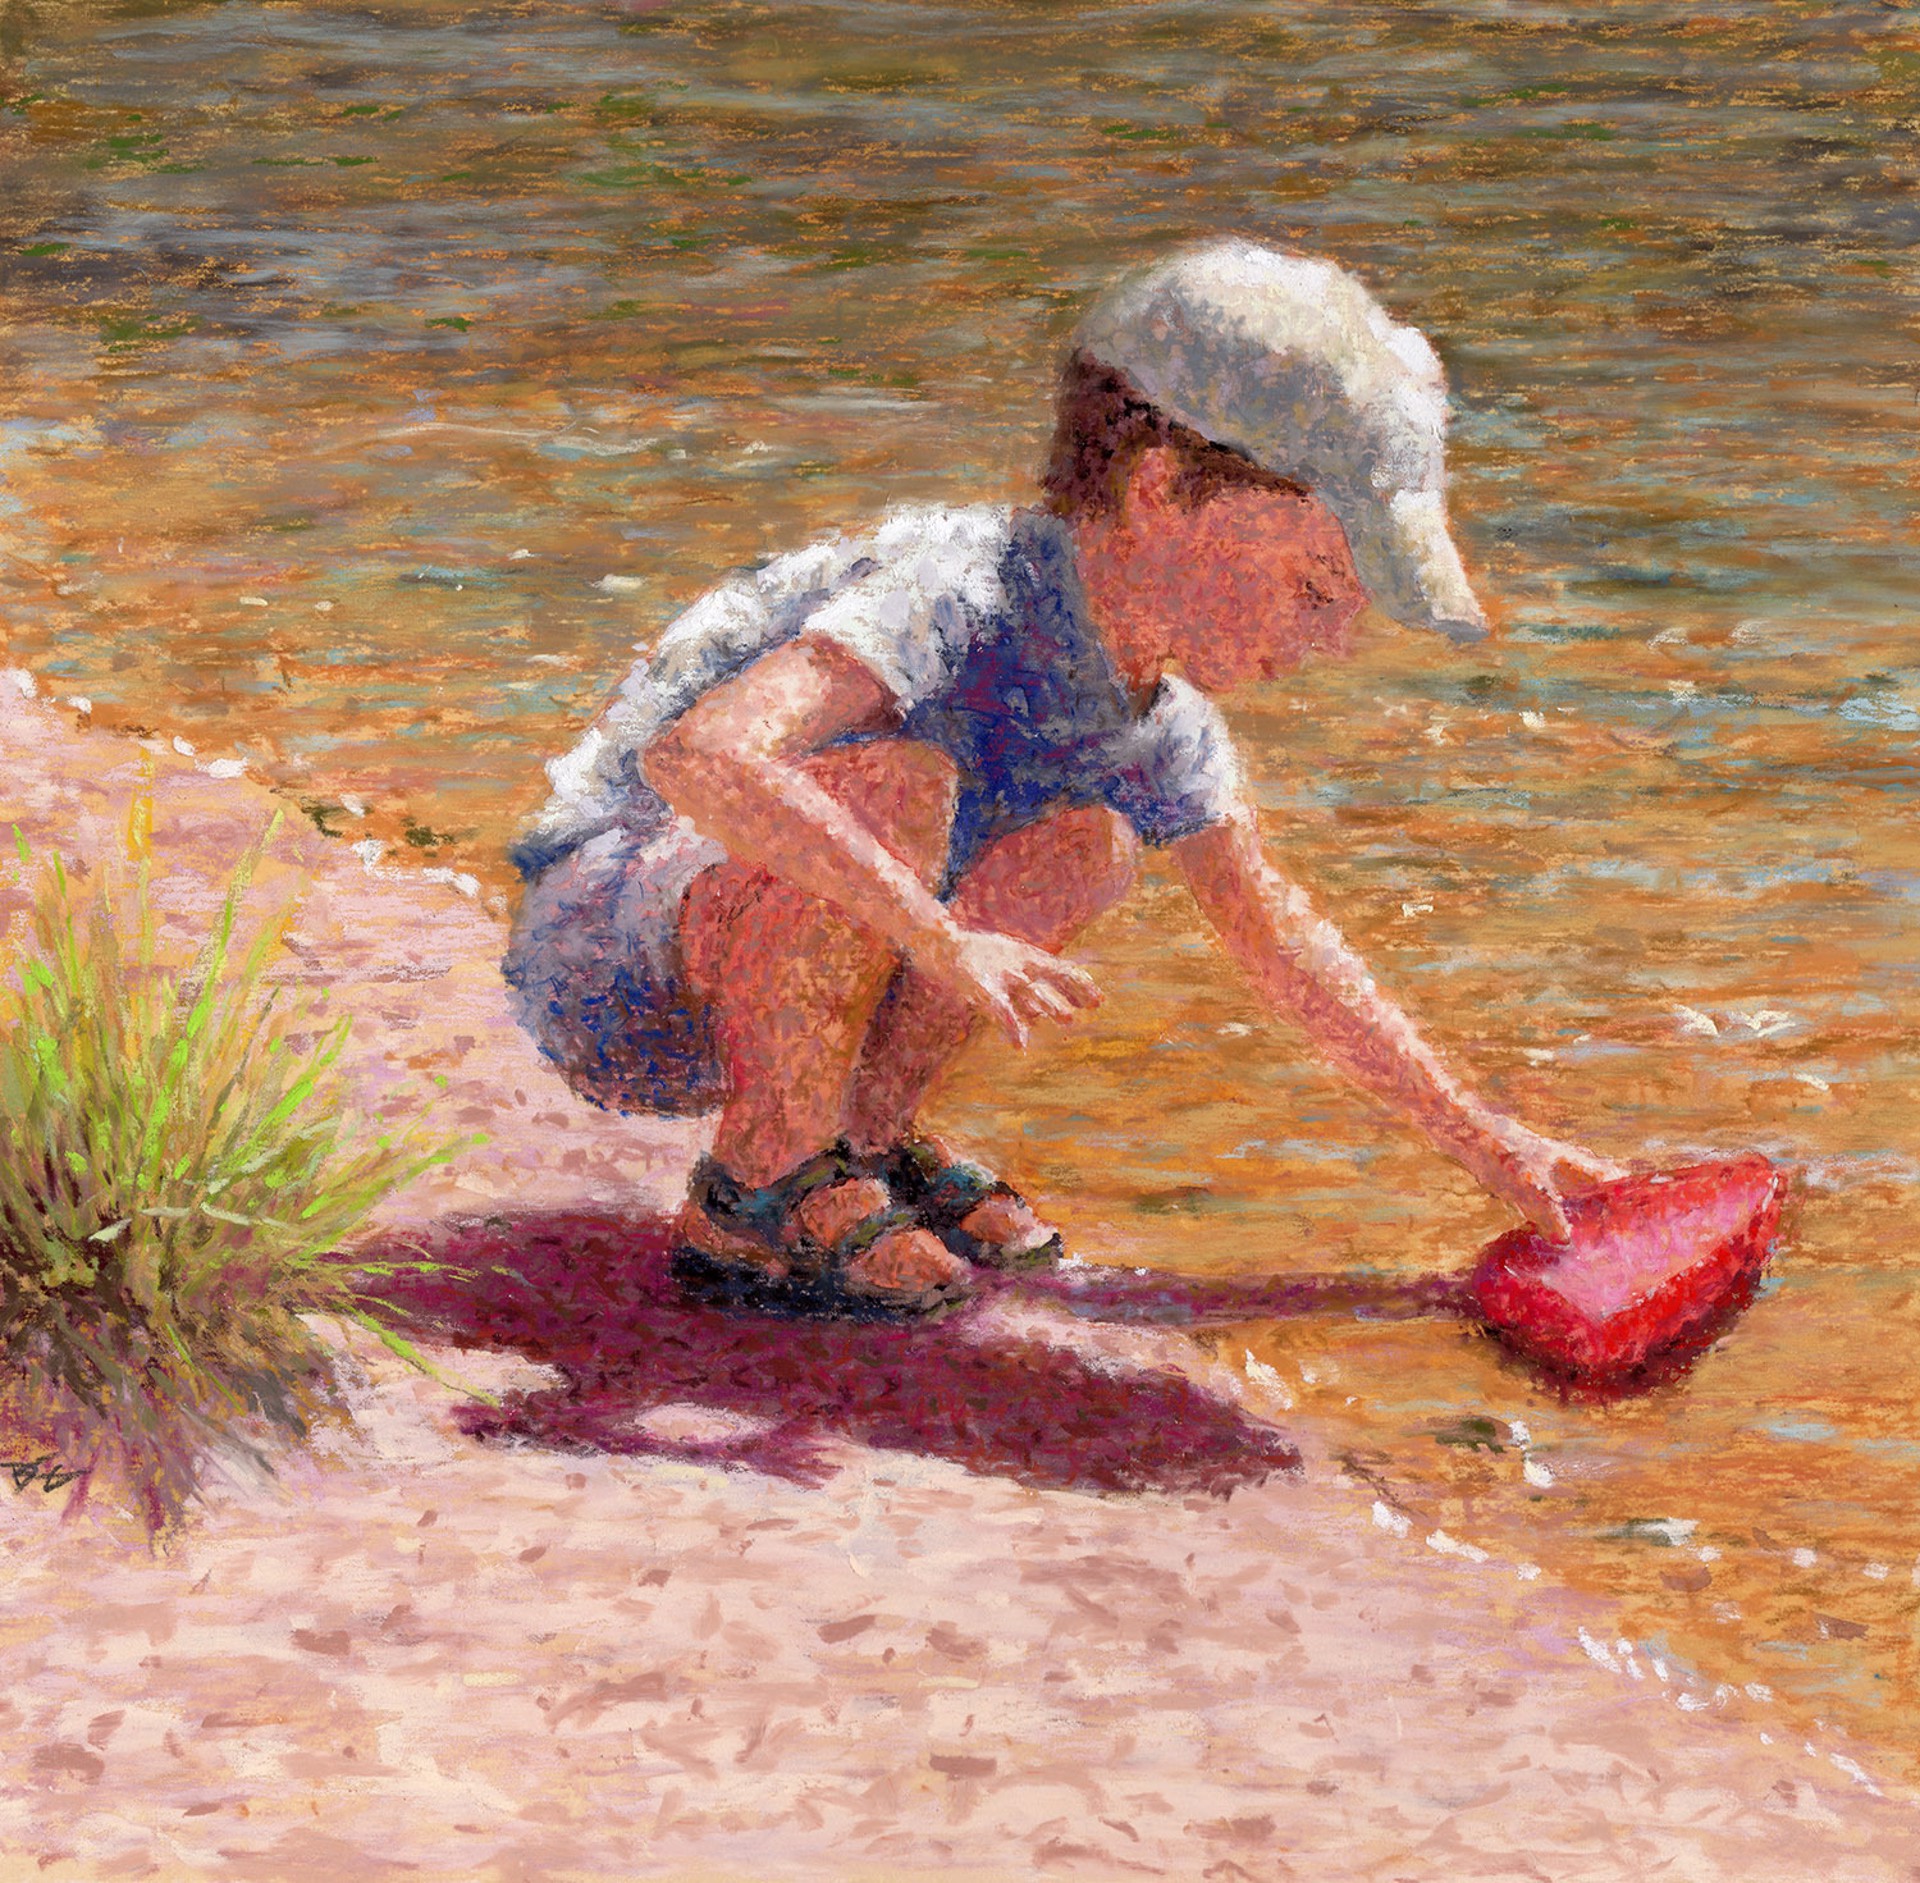 A Boy, a Boat, and a River by Debra Carter